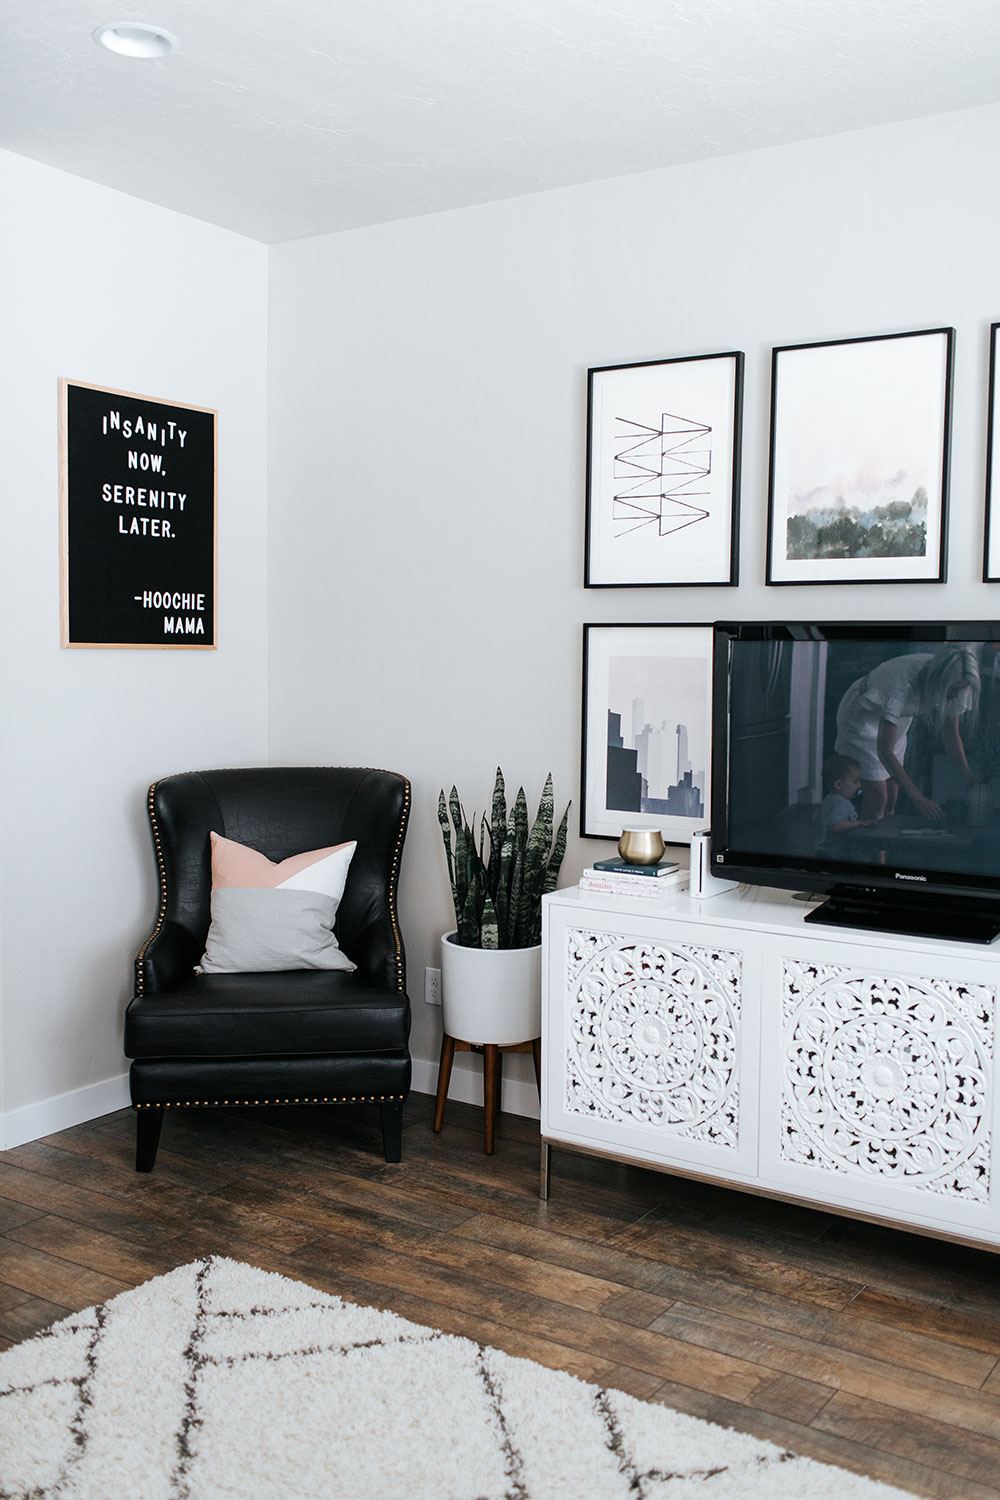 How to design a small living room | living room decor ideas | gallery wall inspiration | minted art styling service | Little Miss Fearless